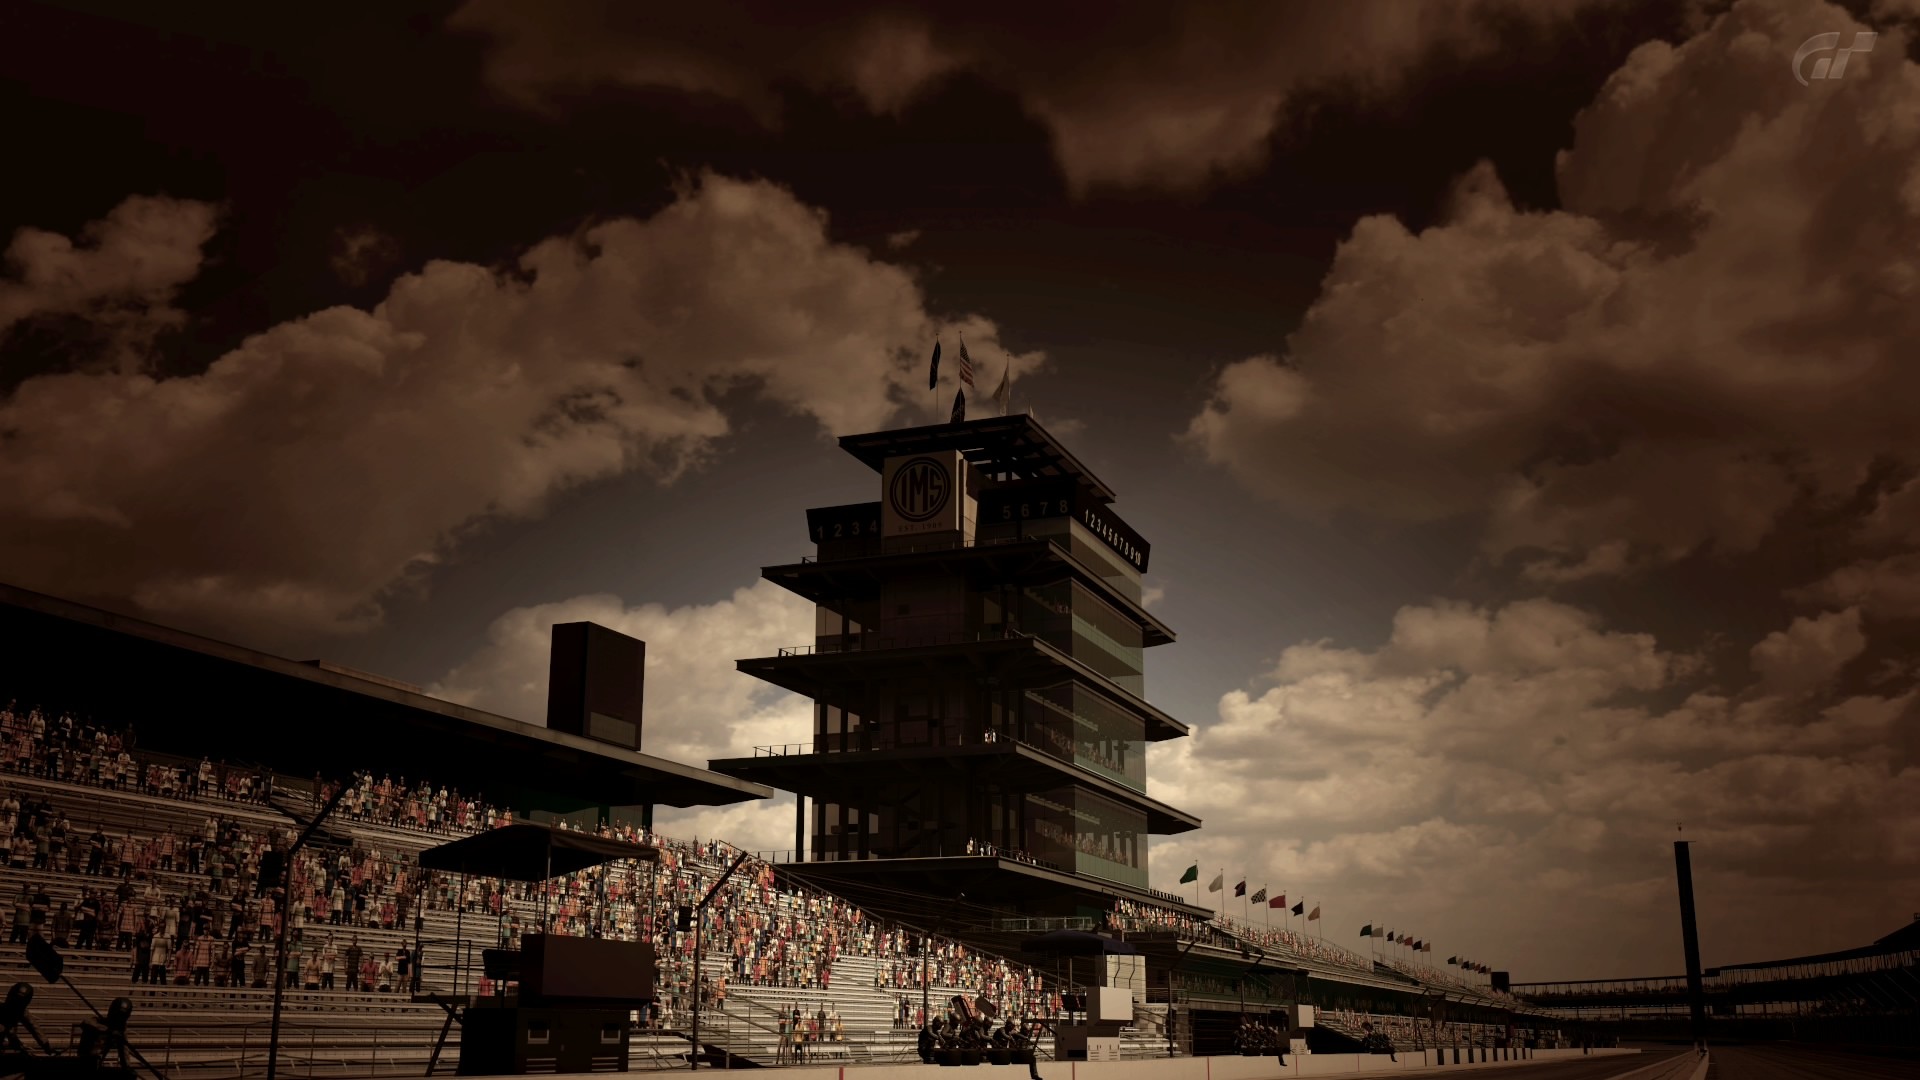 1920x1080 Indianapolis Motor Speedway. More Racetrack wallpapers